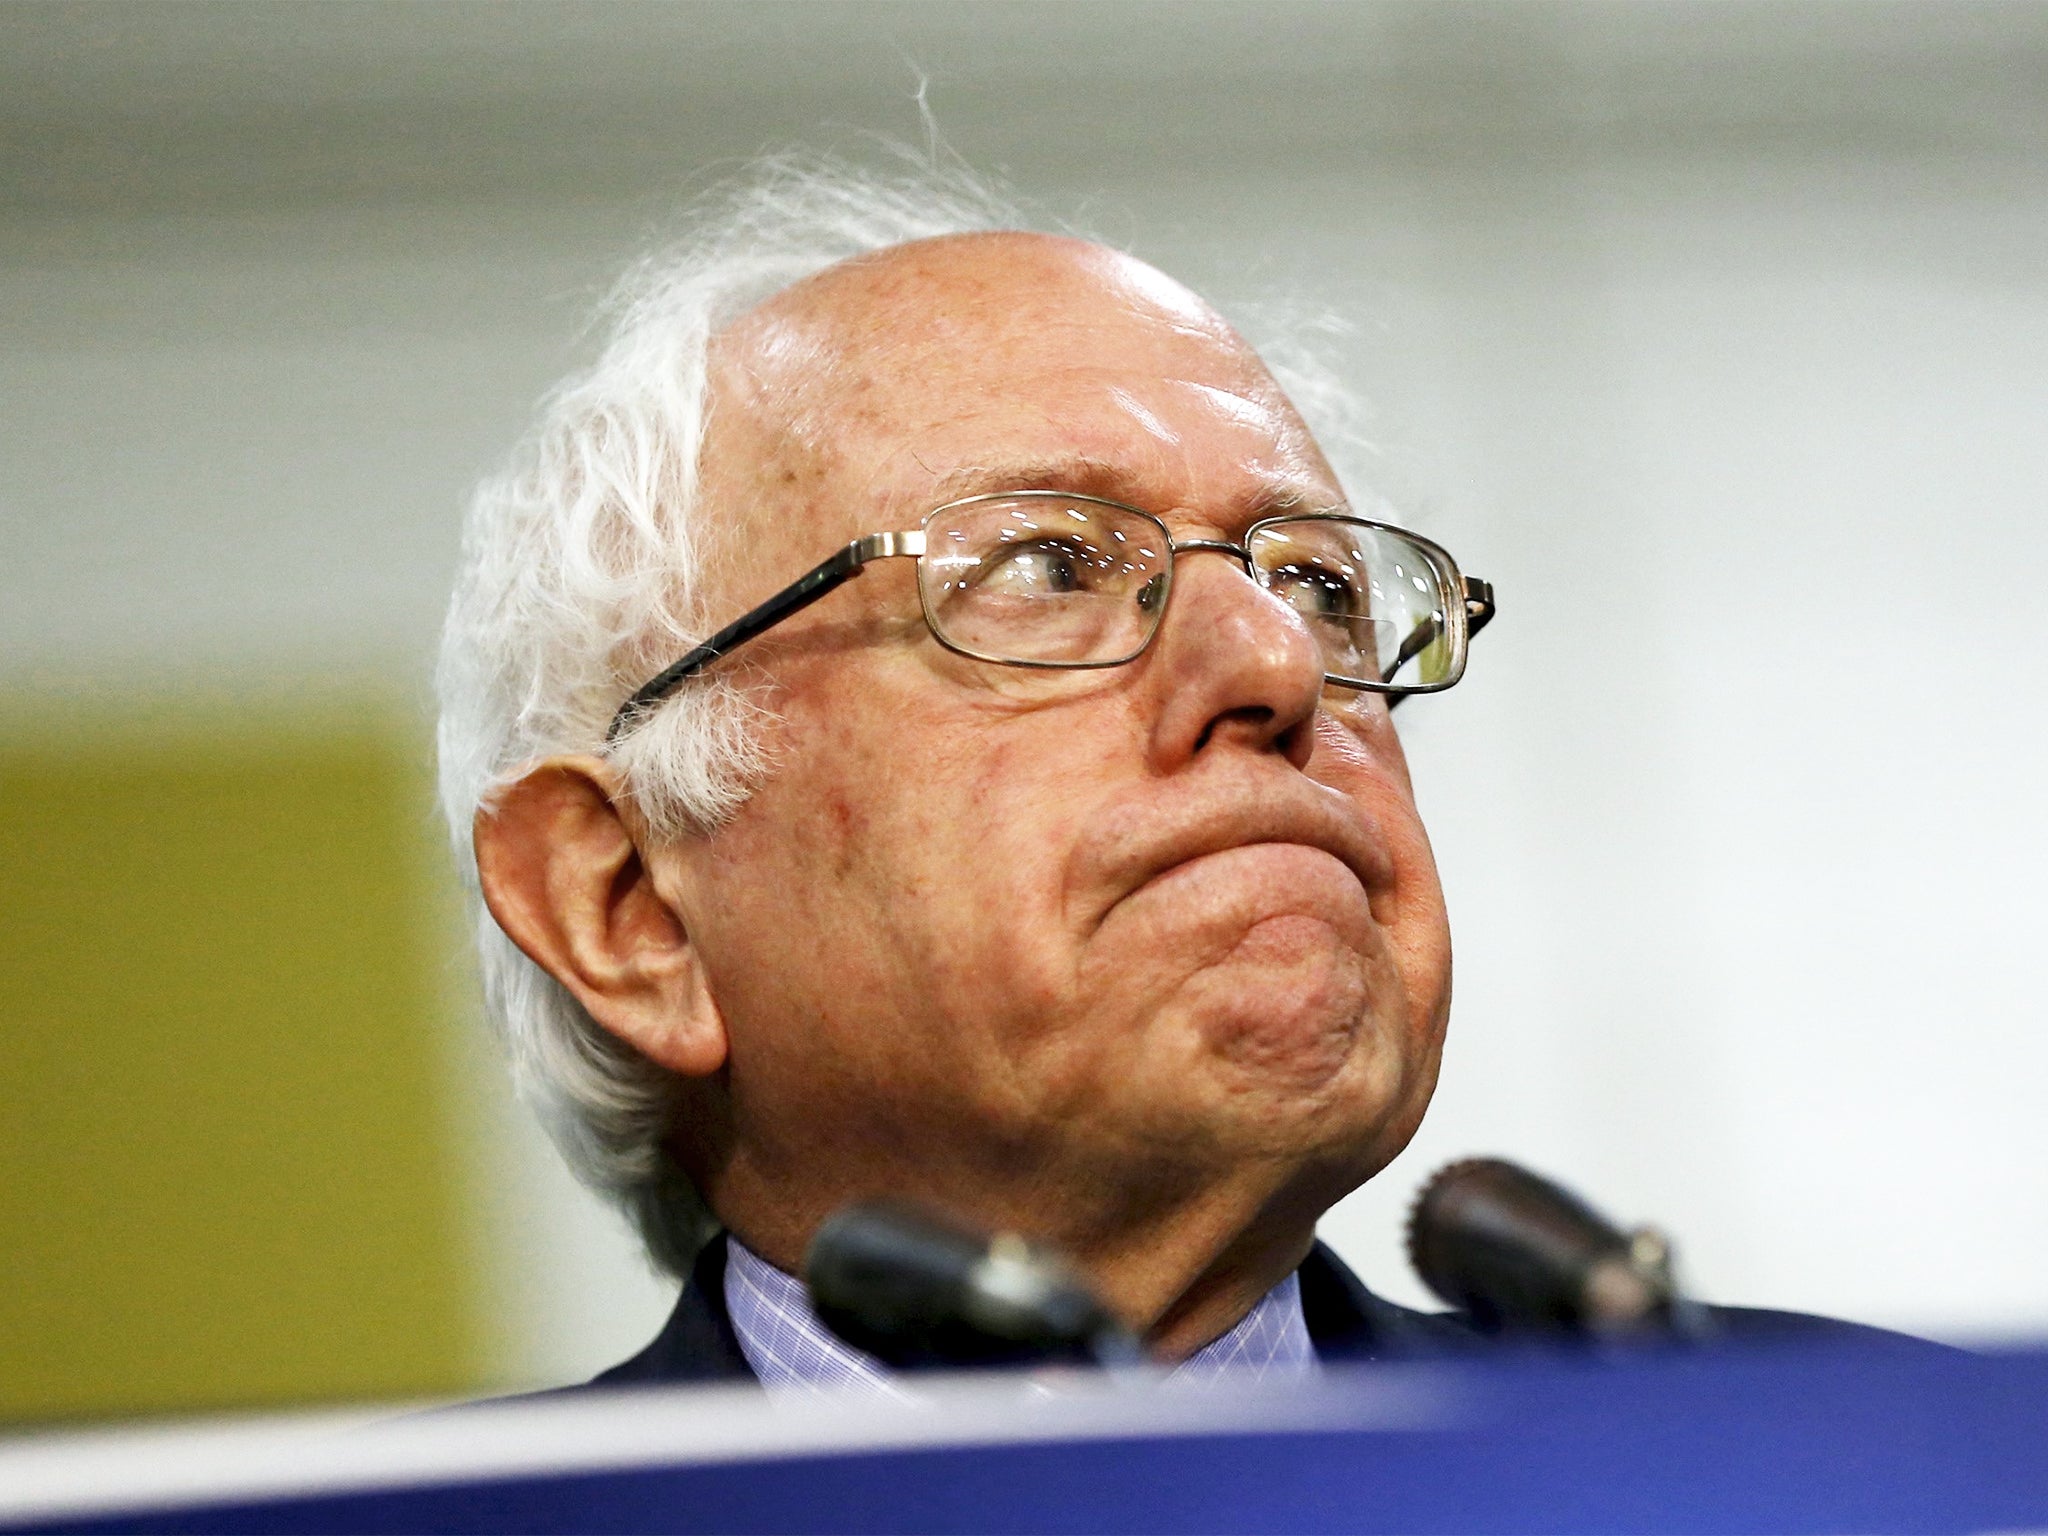 Bernie Sanders' hopes of winning the Democratic nomination are fading fast